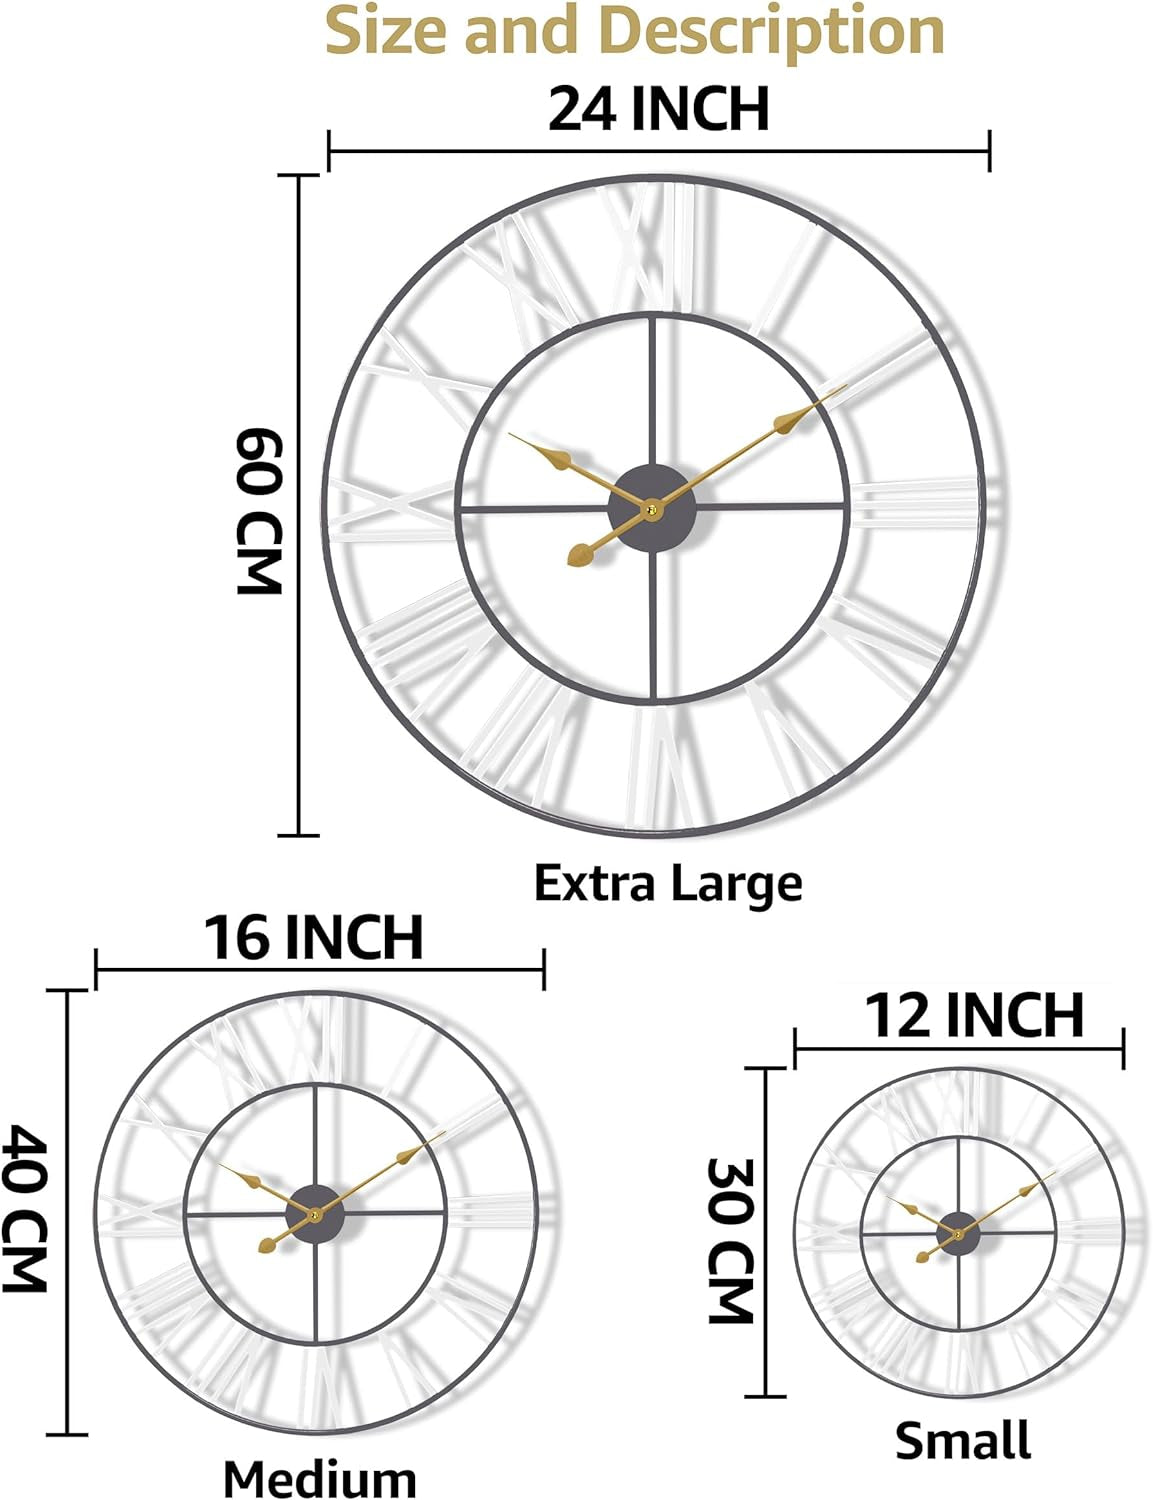 Large Wall Clock for Living Room - 24-Inch Wall Clock - Oversized Centurian Roman Numeral Style Modern Wall Clocks - Large Clock Home Decor - Metal Decorative Analog Metal Clock (White)